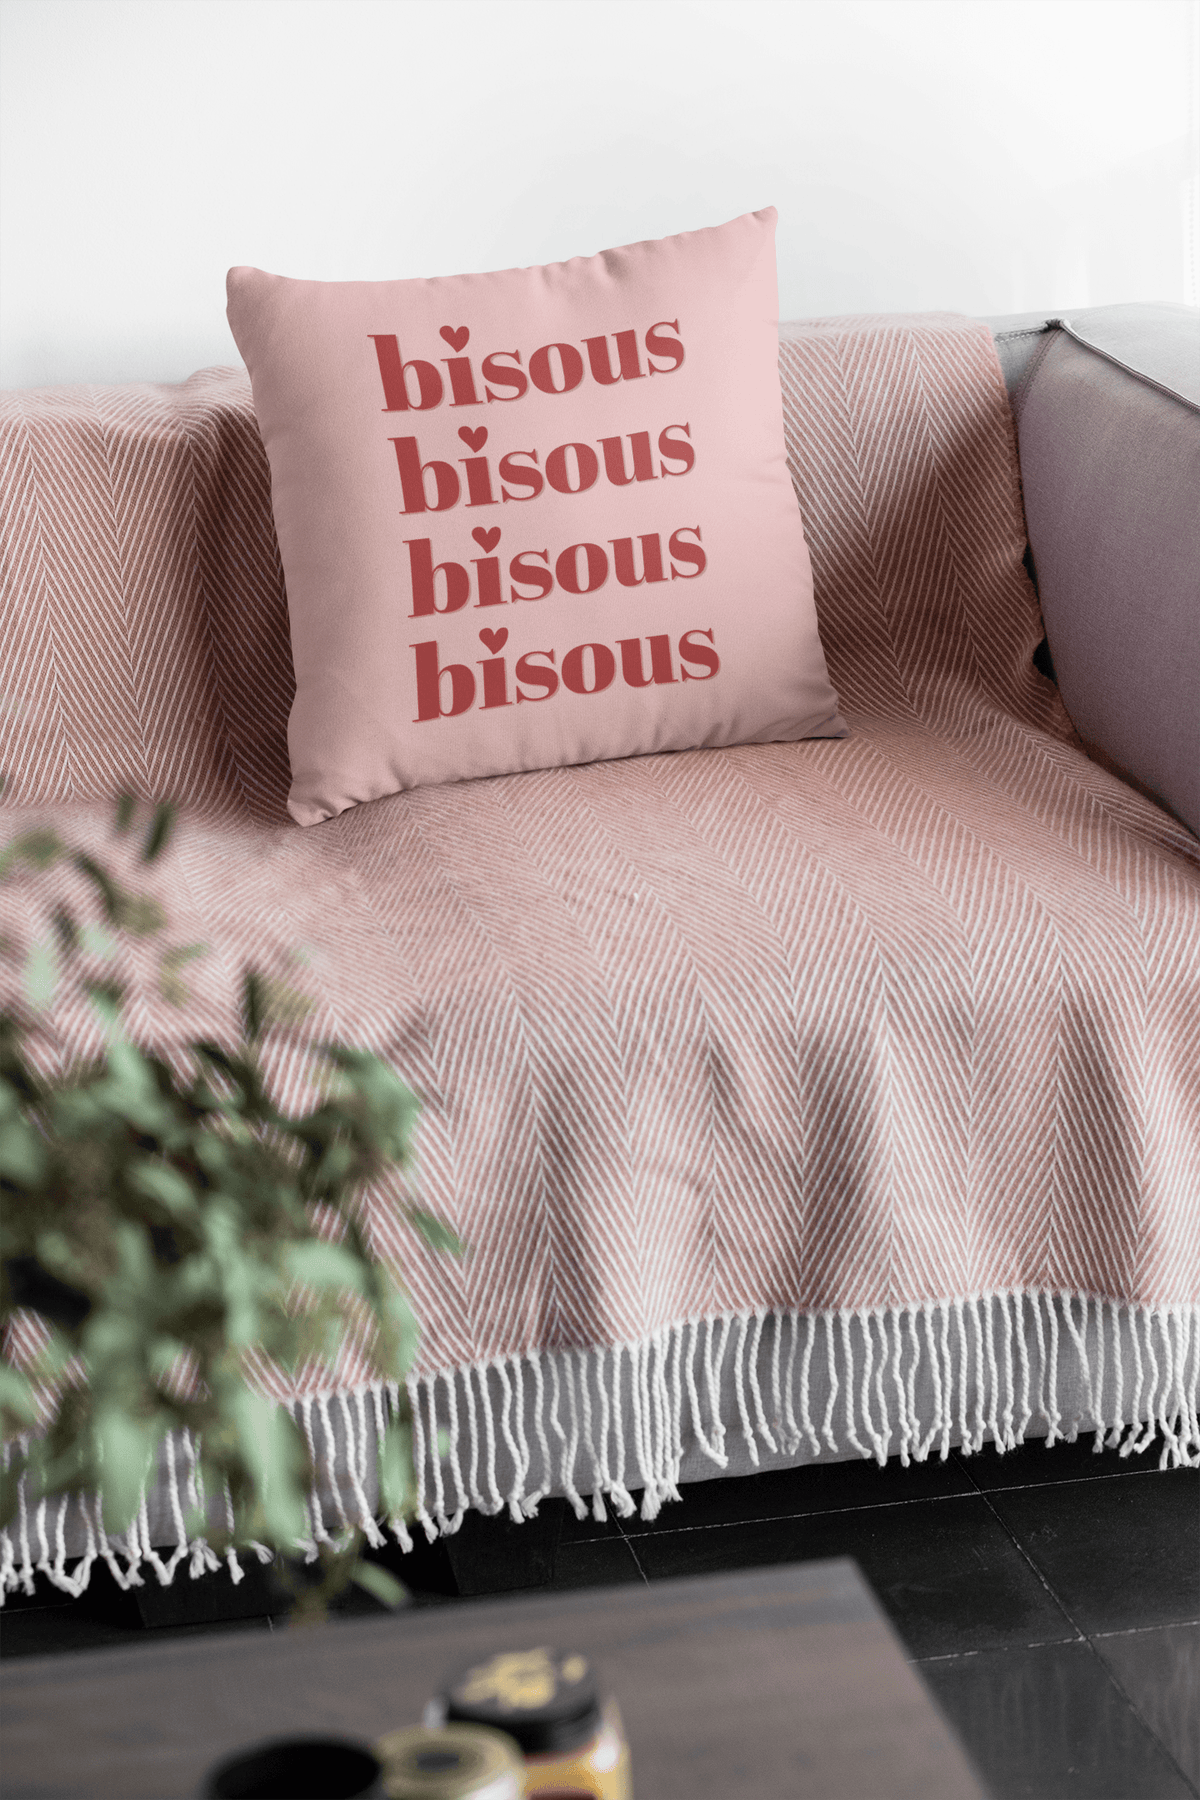 Pillows - Dorm Room Pillow - French Bisous